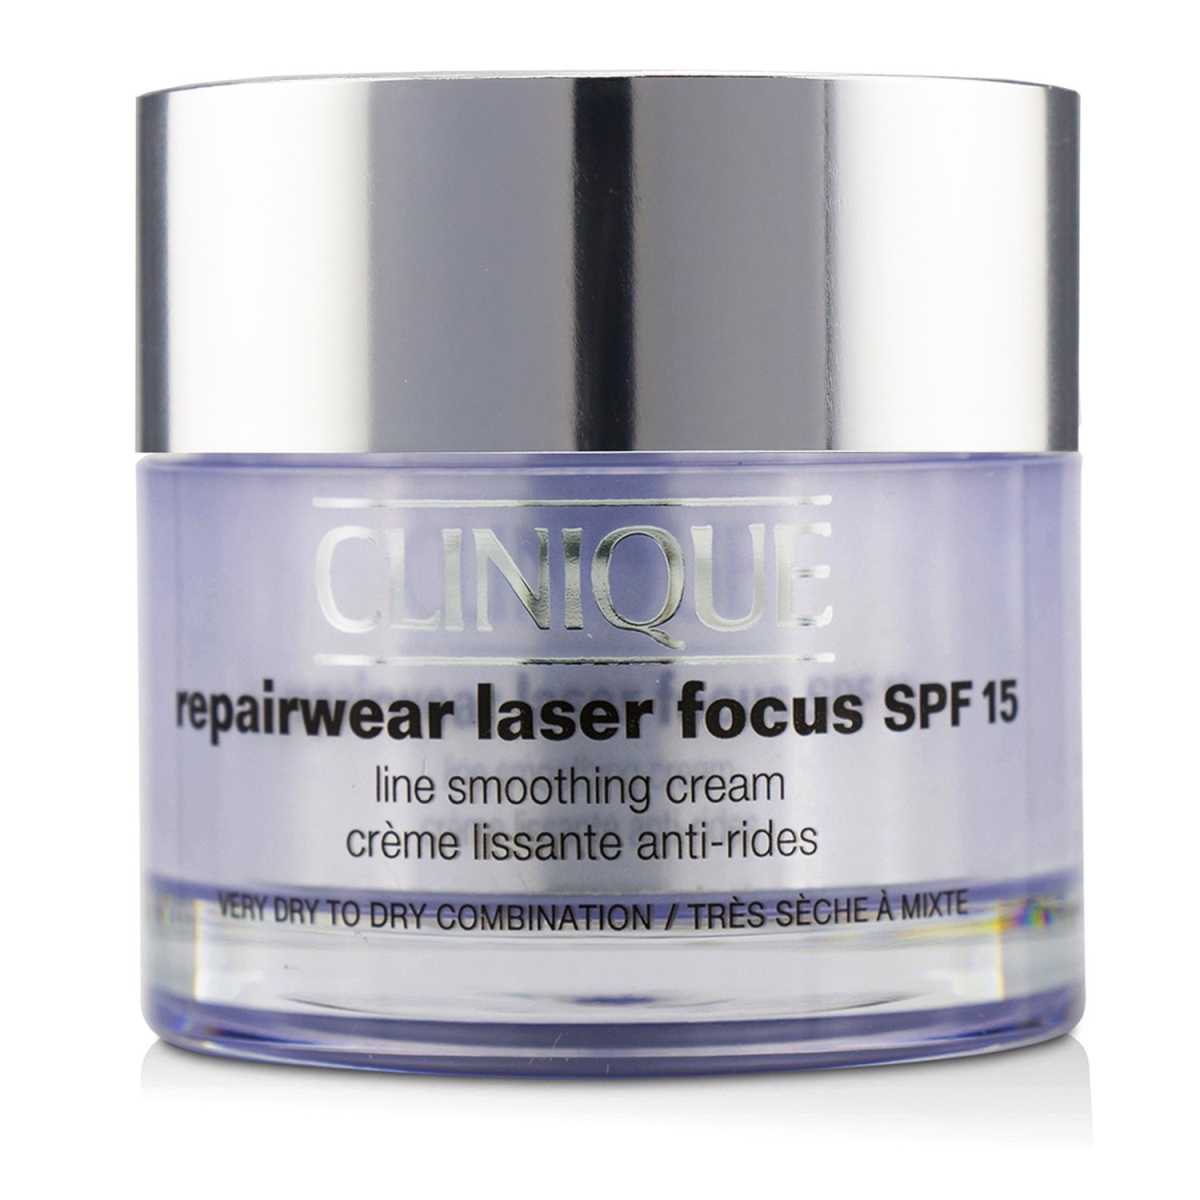 213304 1.7 oz Repairwear Laser Focus Line Smoothing Cream SPF 15 for Very Dry to Dry Combination -  Clinique